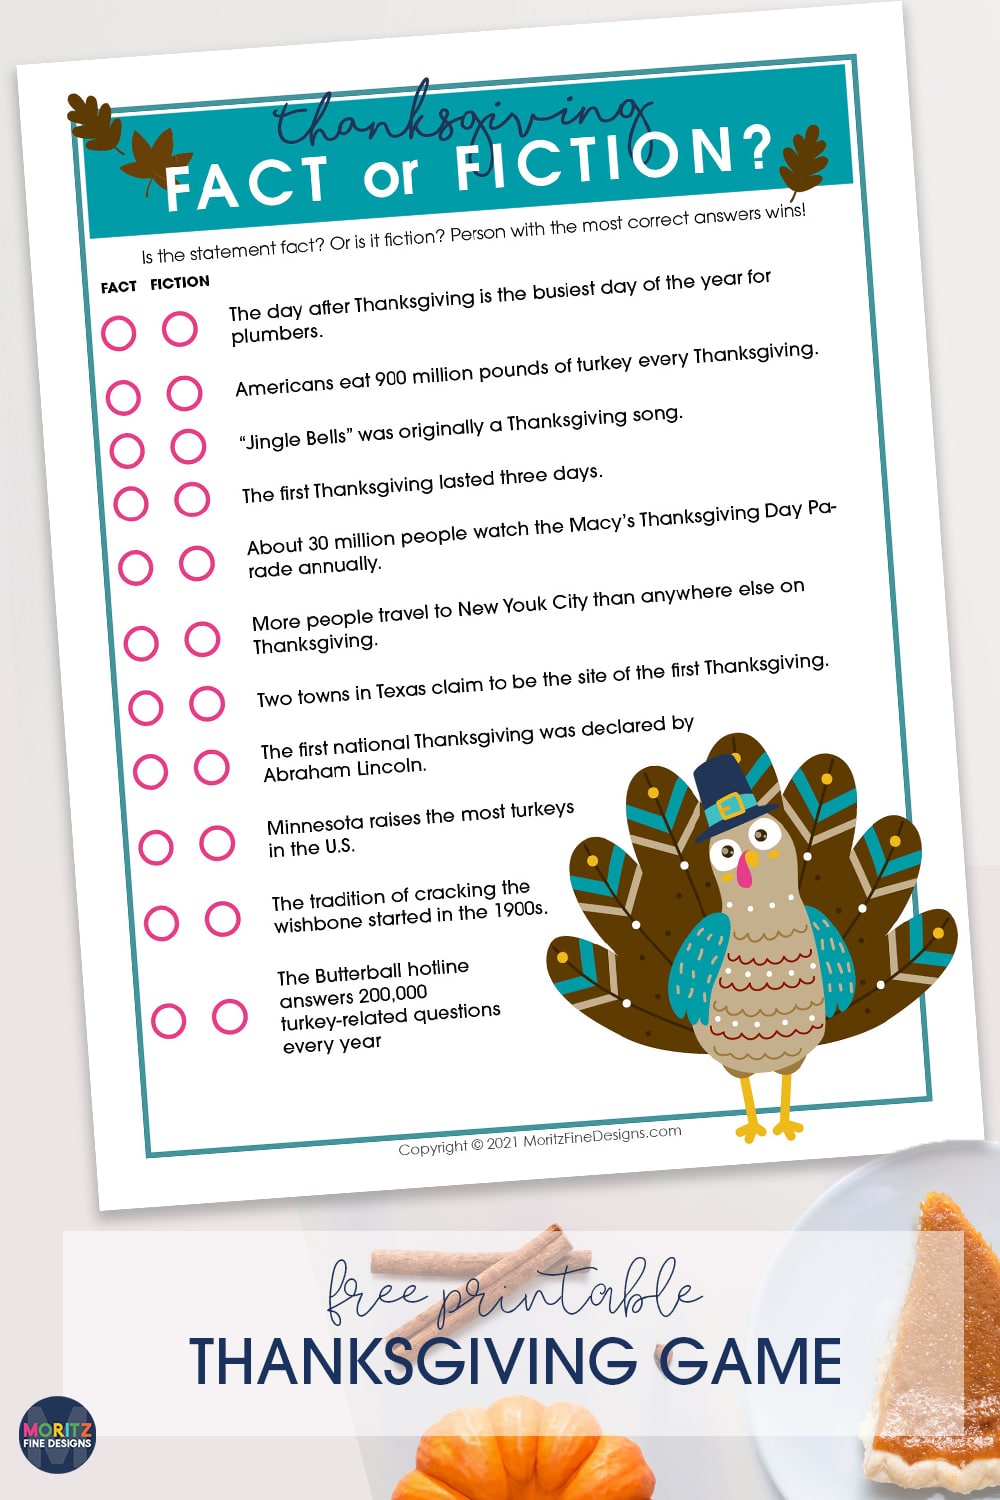 Perfect for Thanksgiving Day, this free printable family Thanksgiving Game Fact or Fiction will get the entire family thinking and guessing!